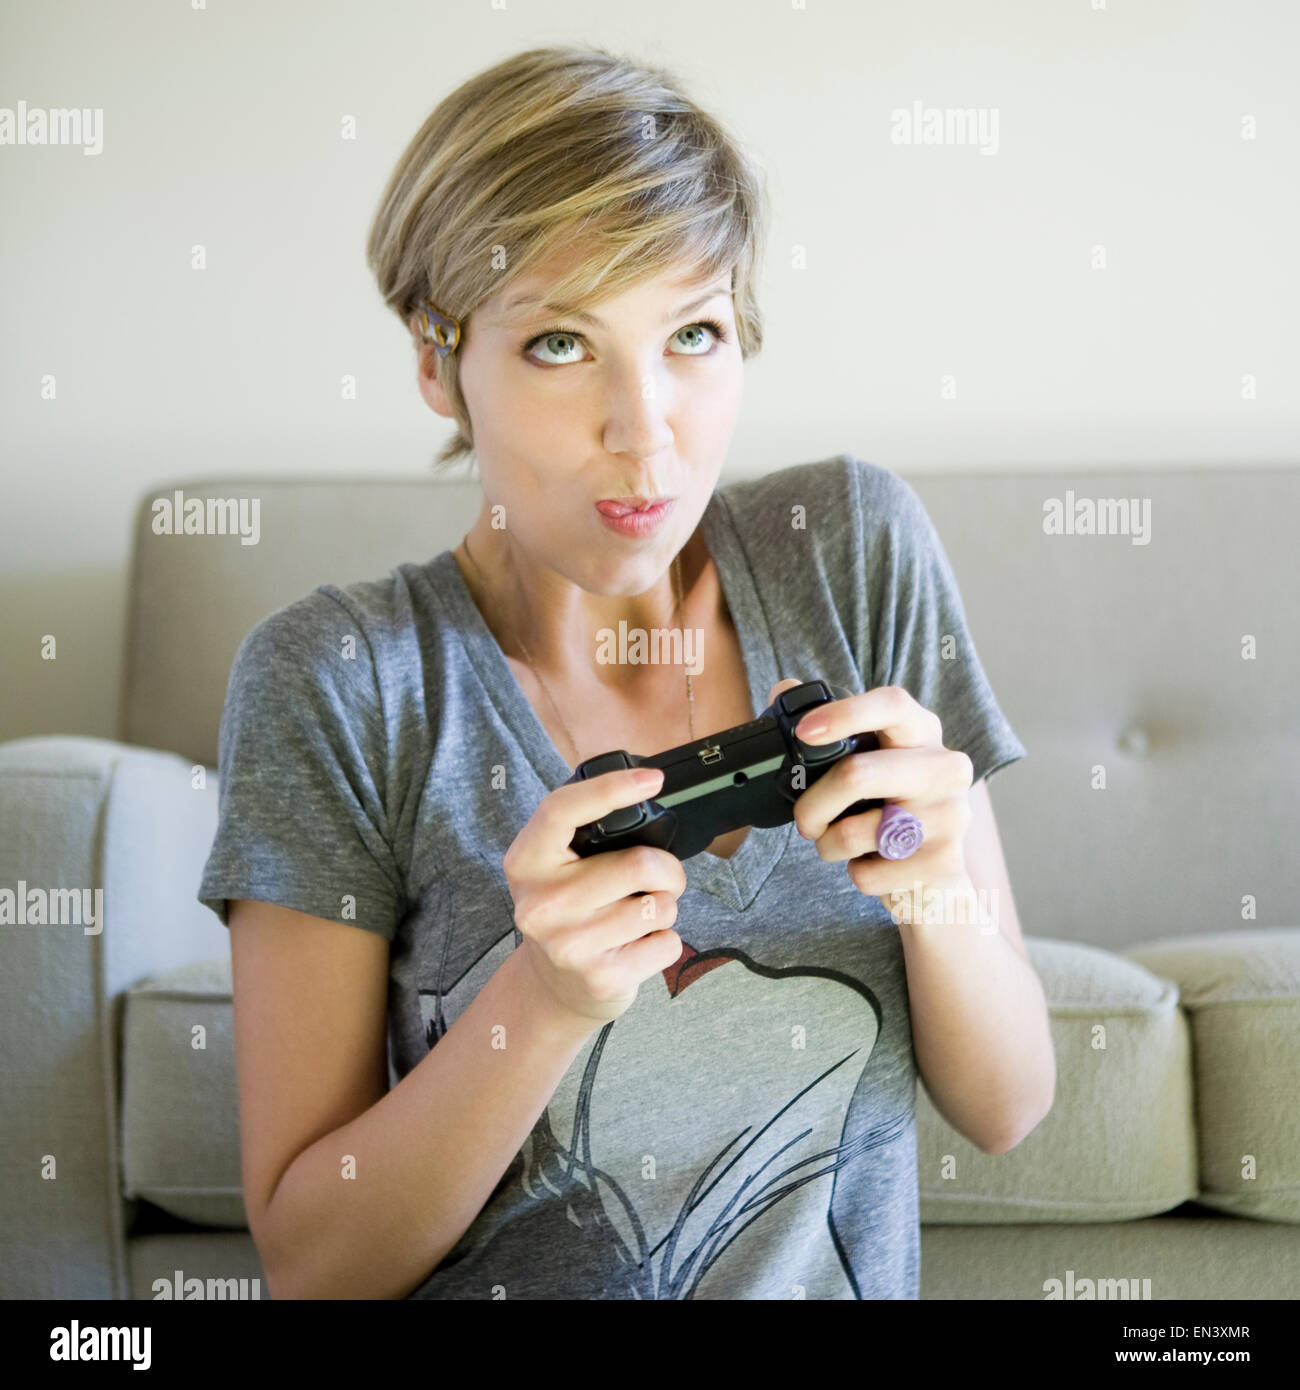 woman holding a video game controller Stock Photo - Alamy